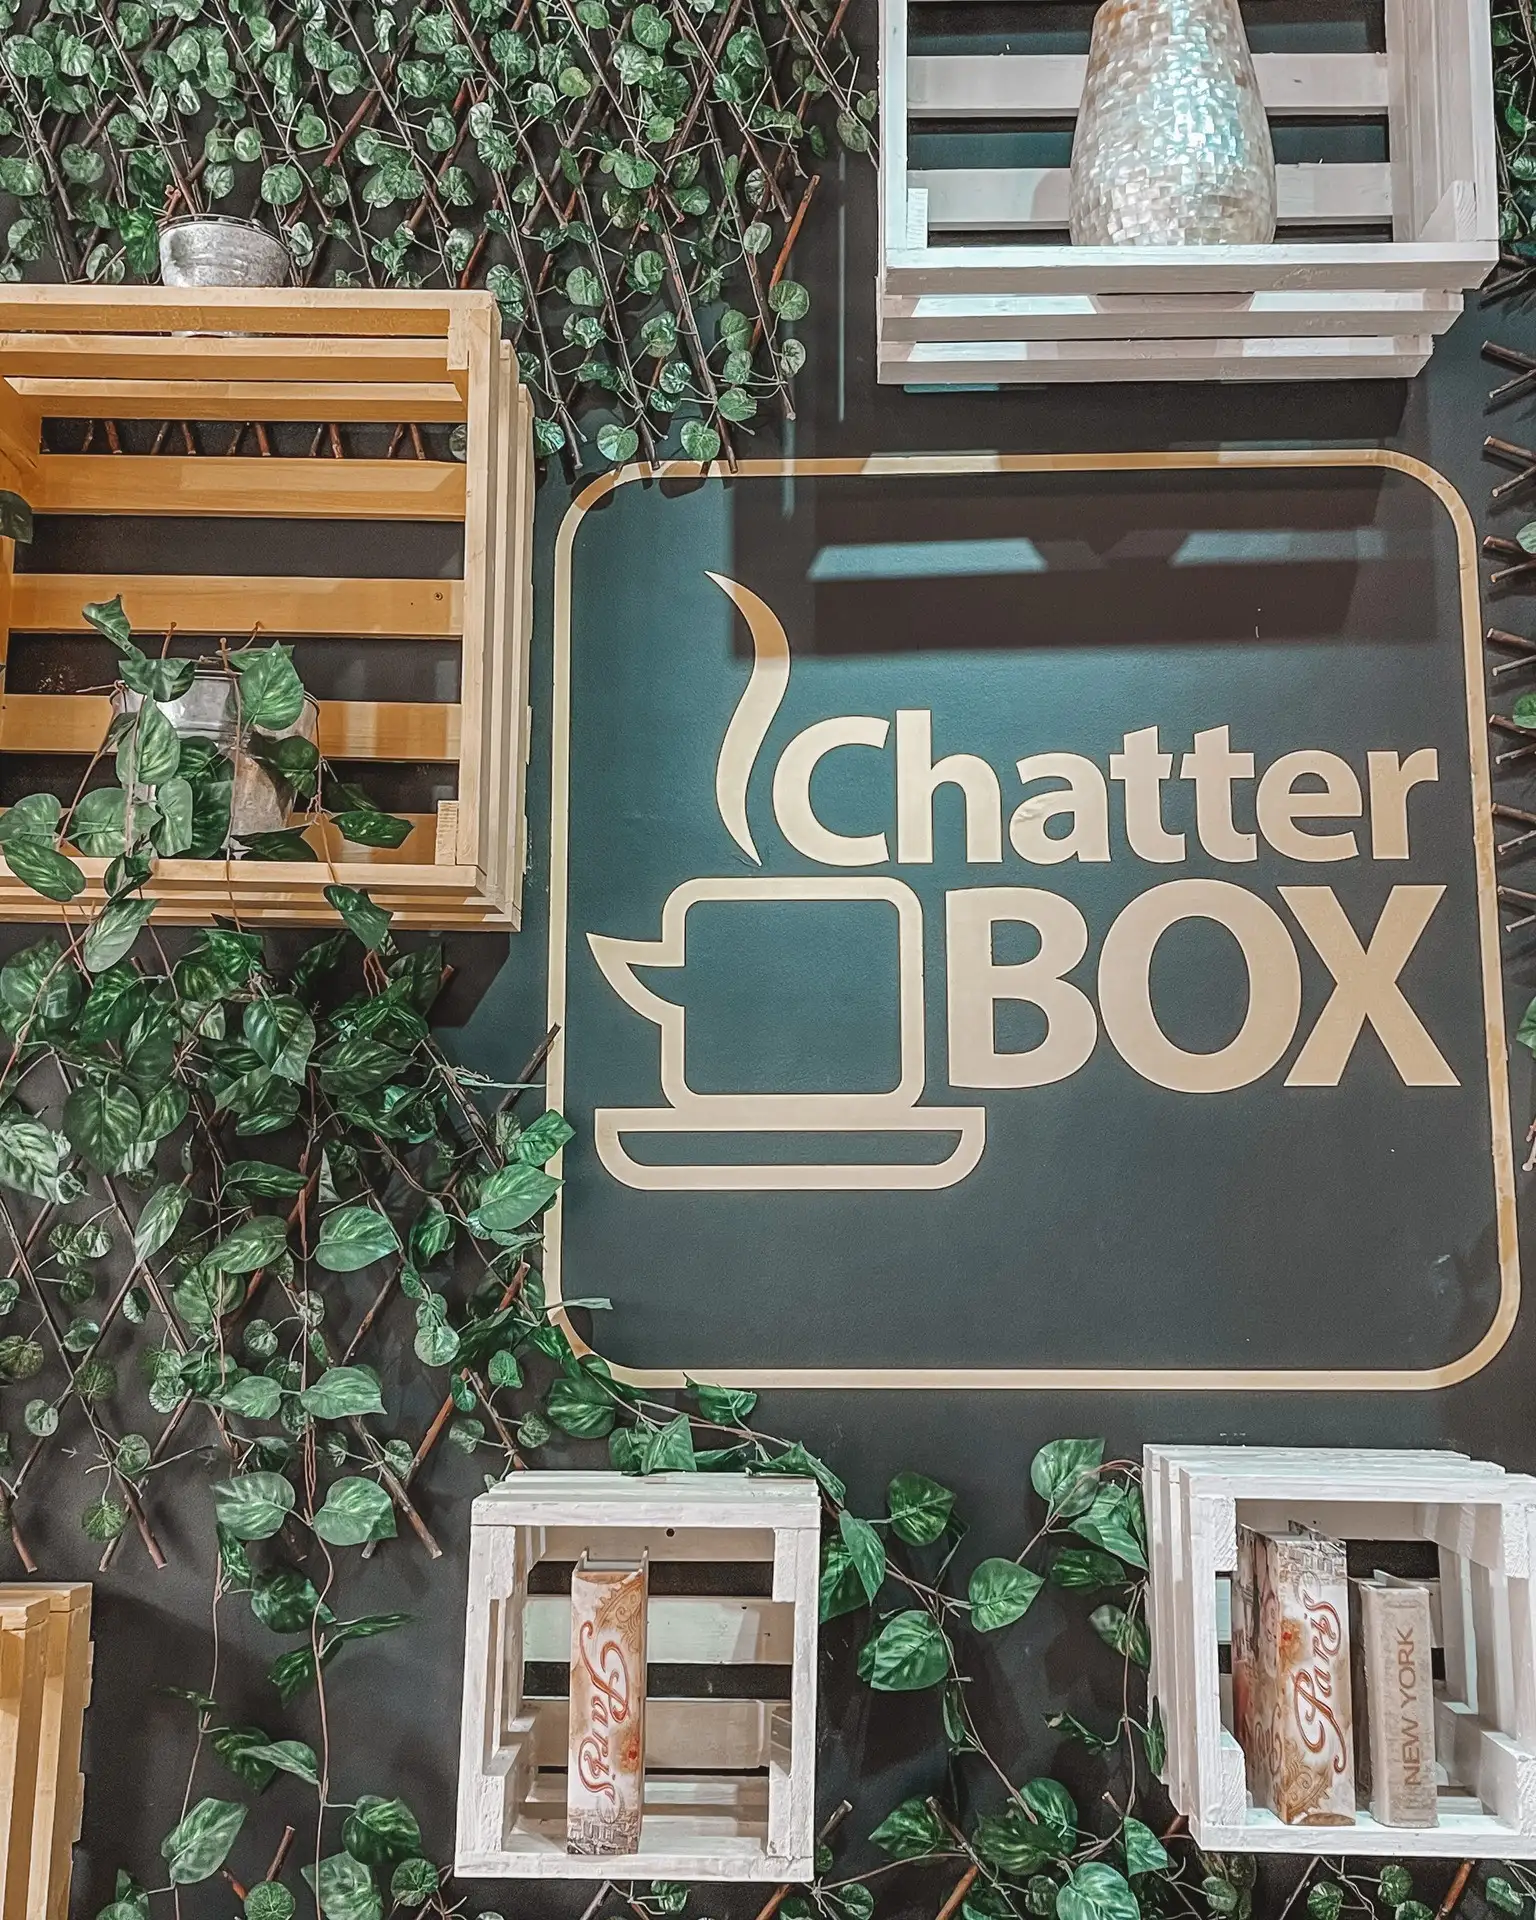 Since 2016, Chatterbox Café has revolutionized the coffee scene in Seychelles, combining traditional charm with fine-dining experiences.